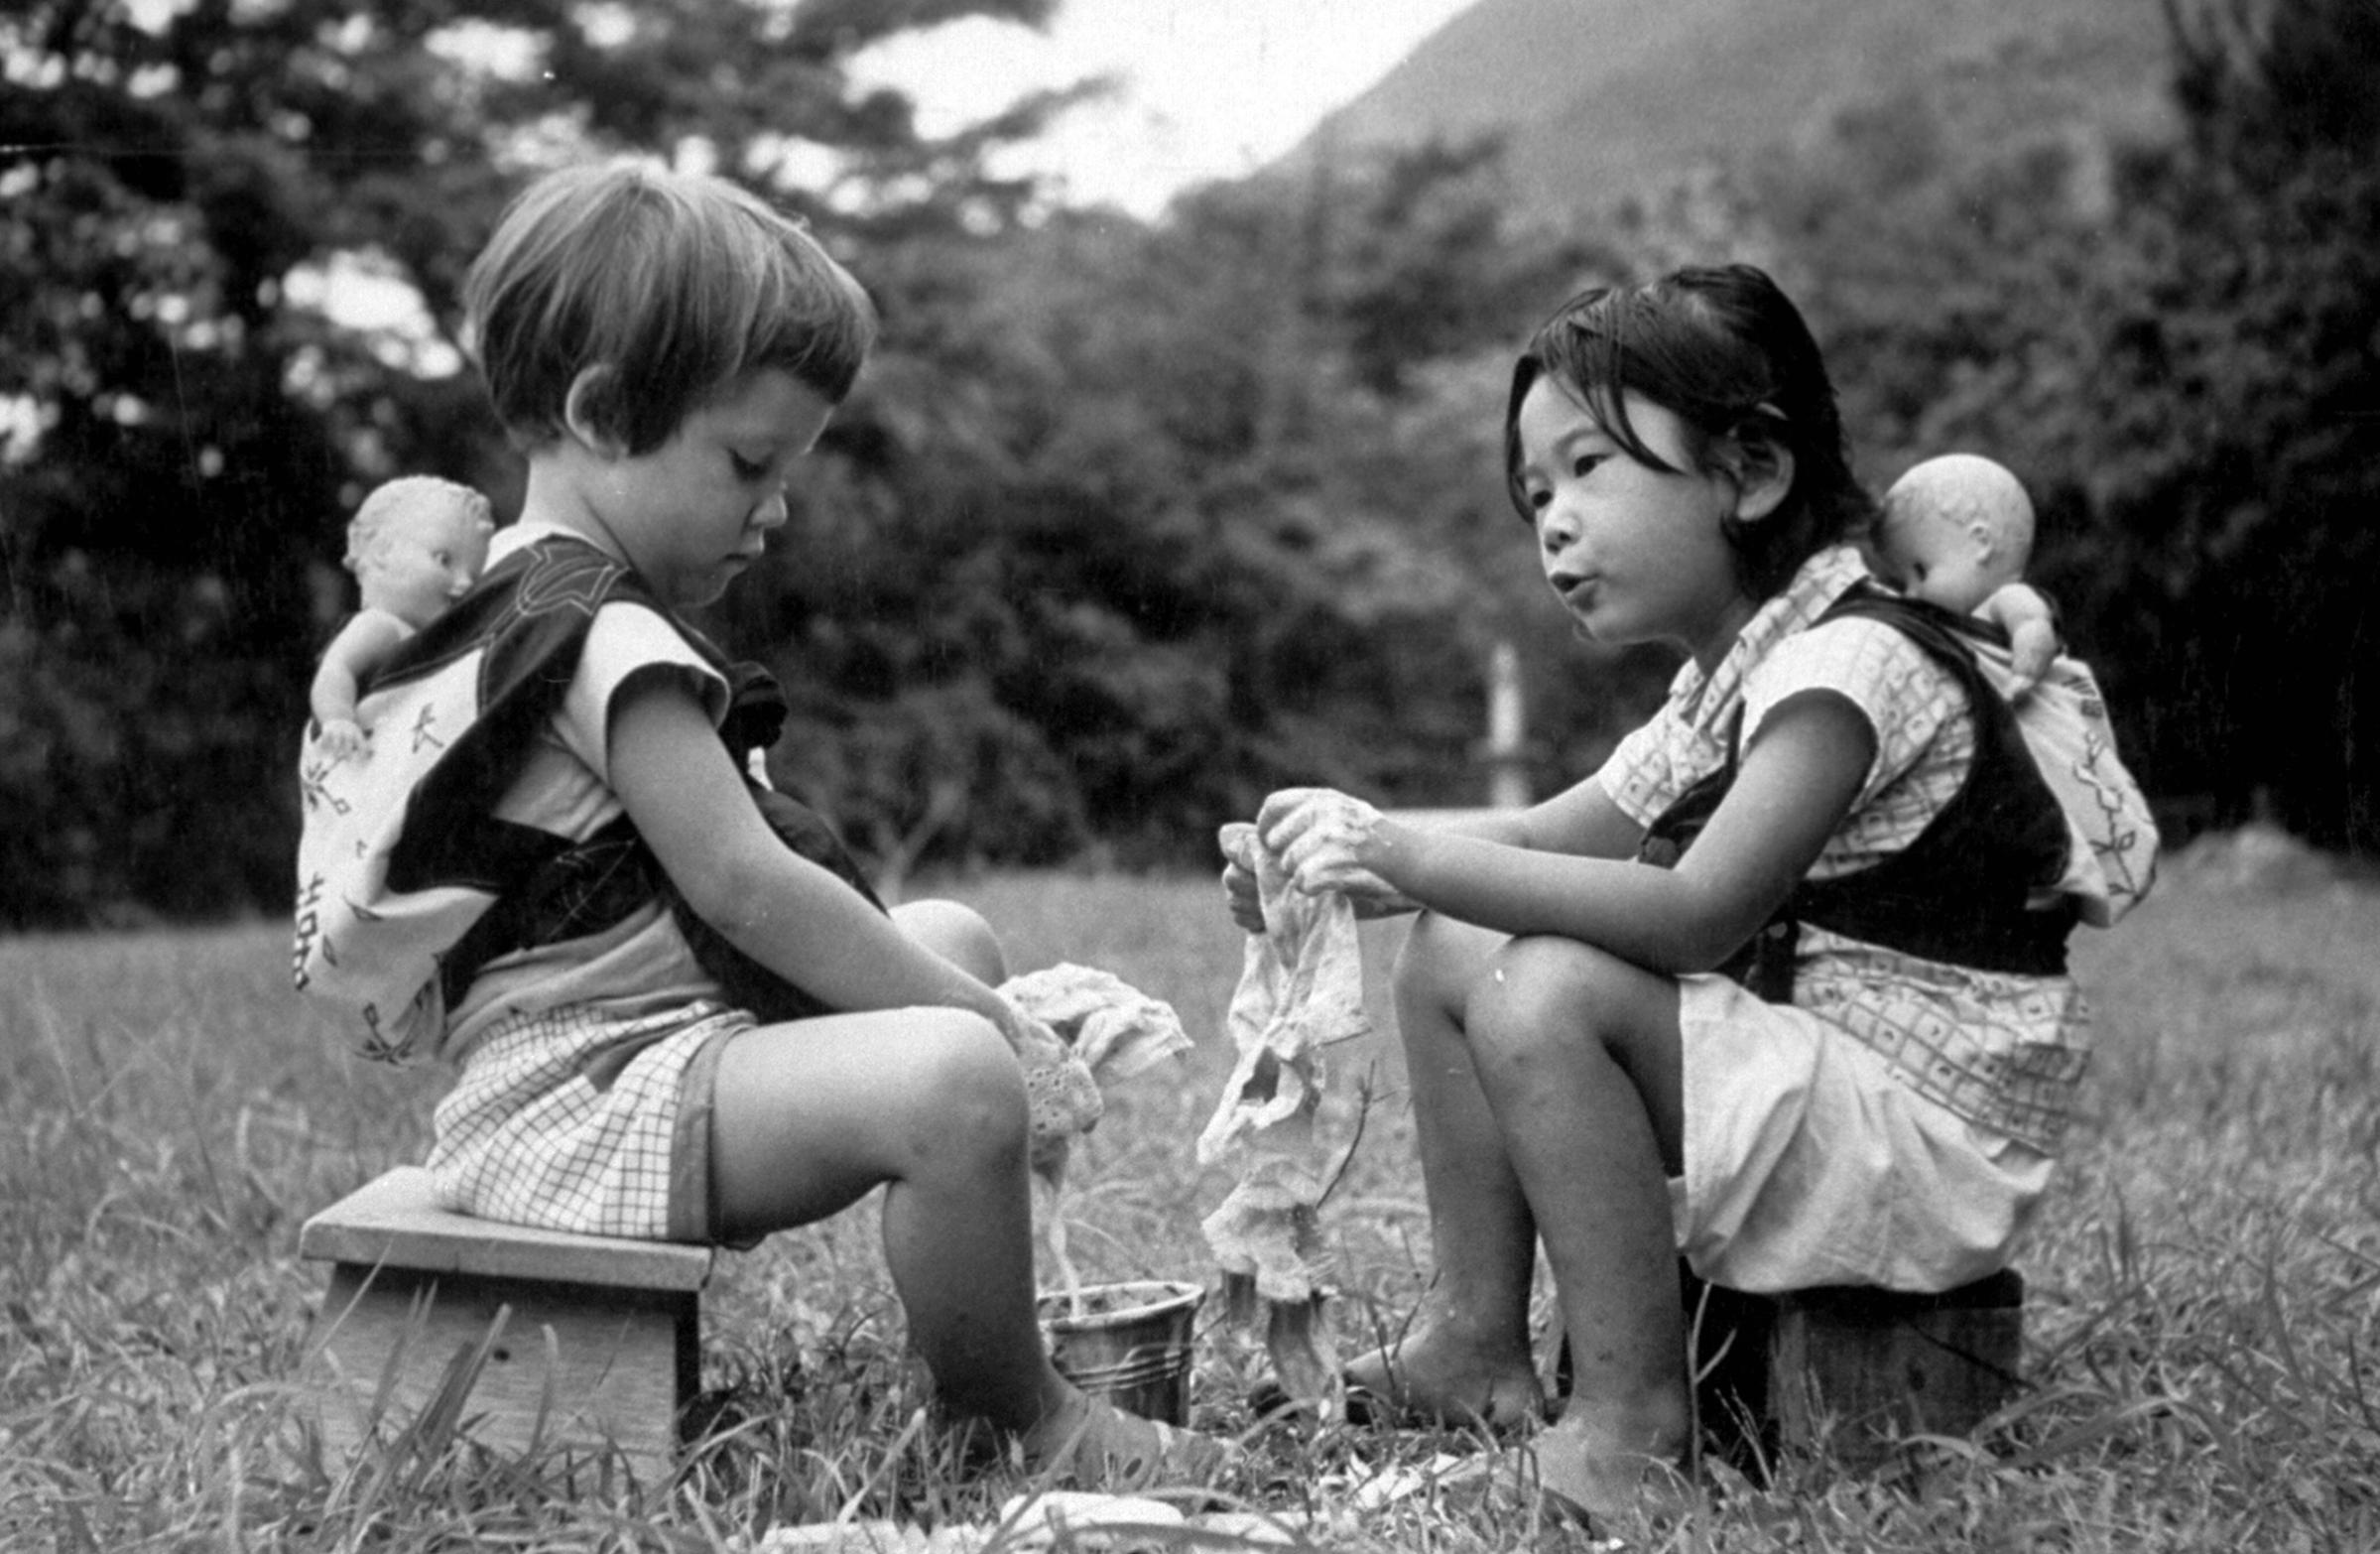 Two young girls playing and washing their doll clothes, 1957.